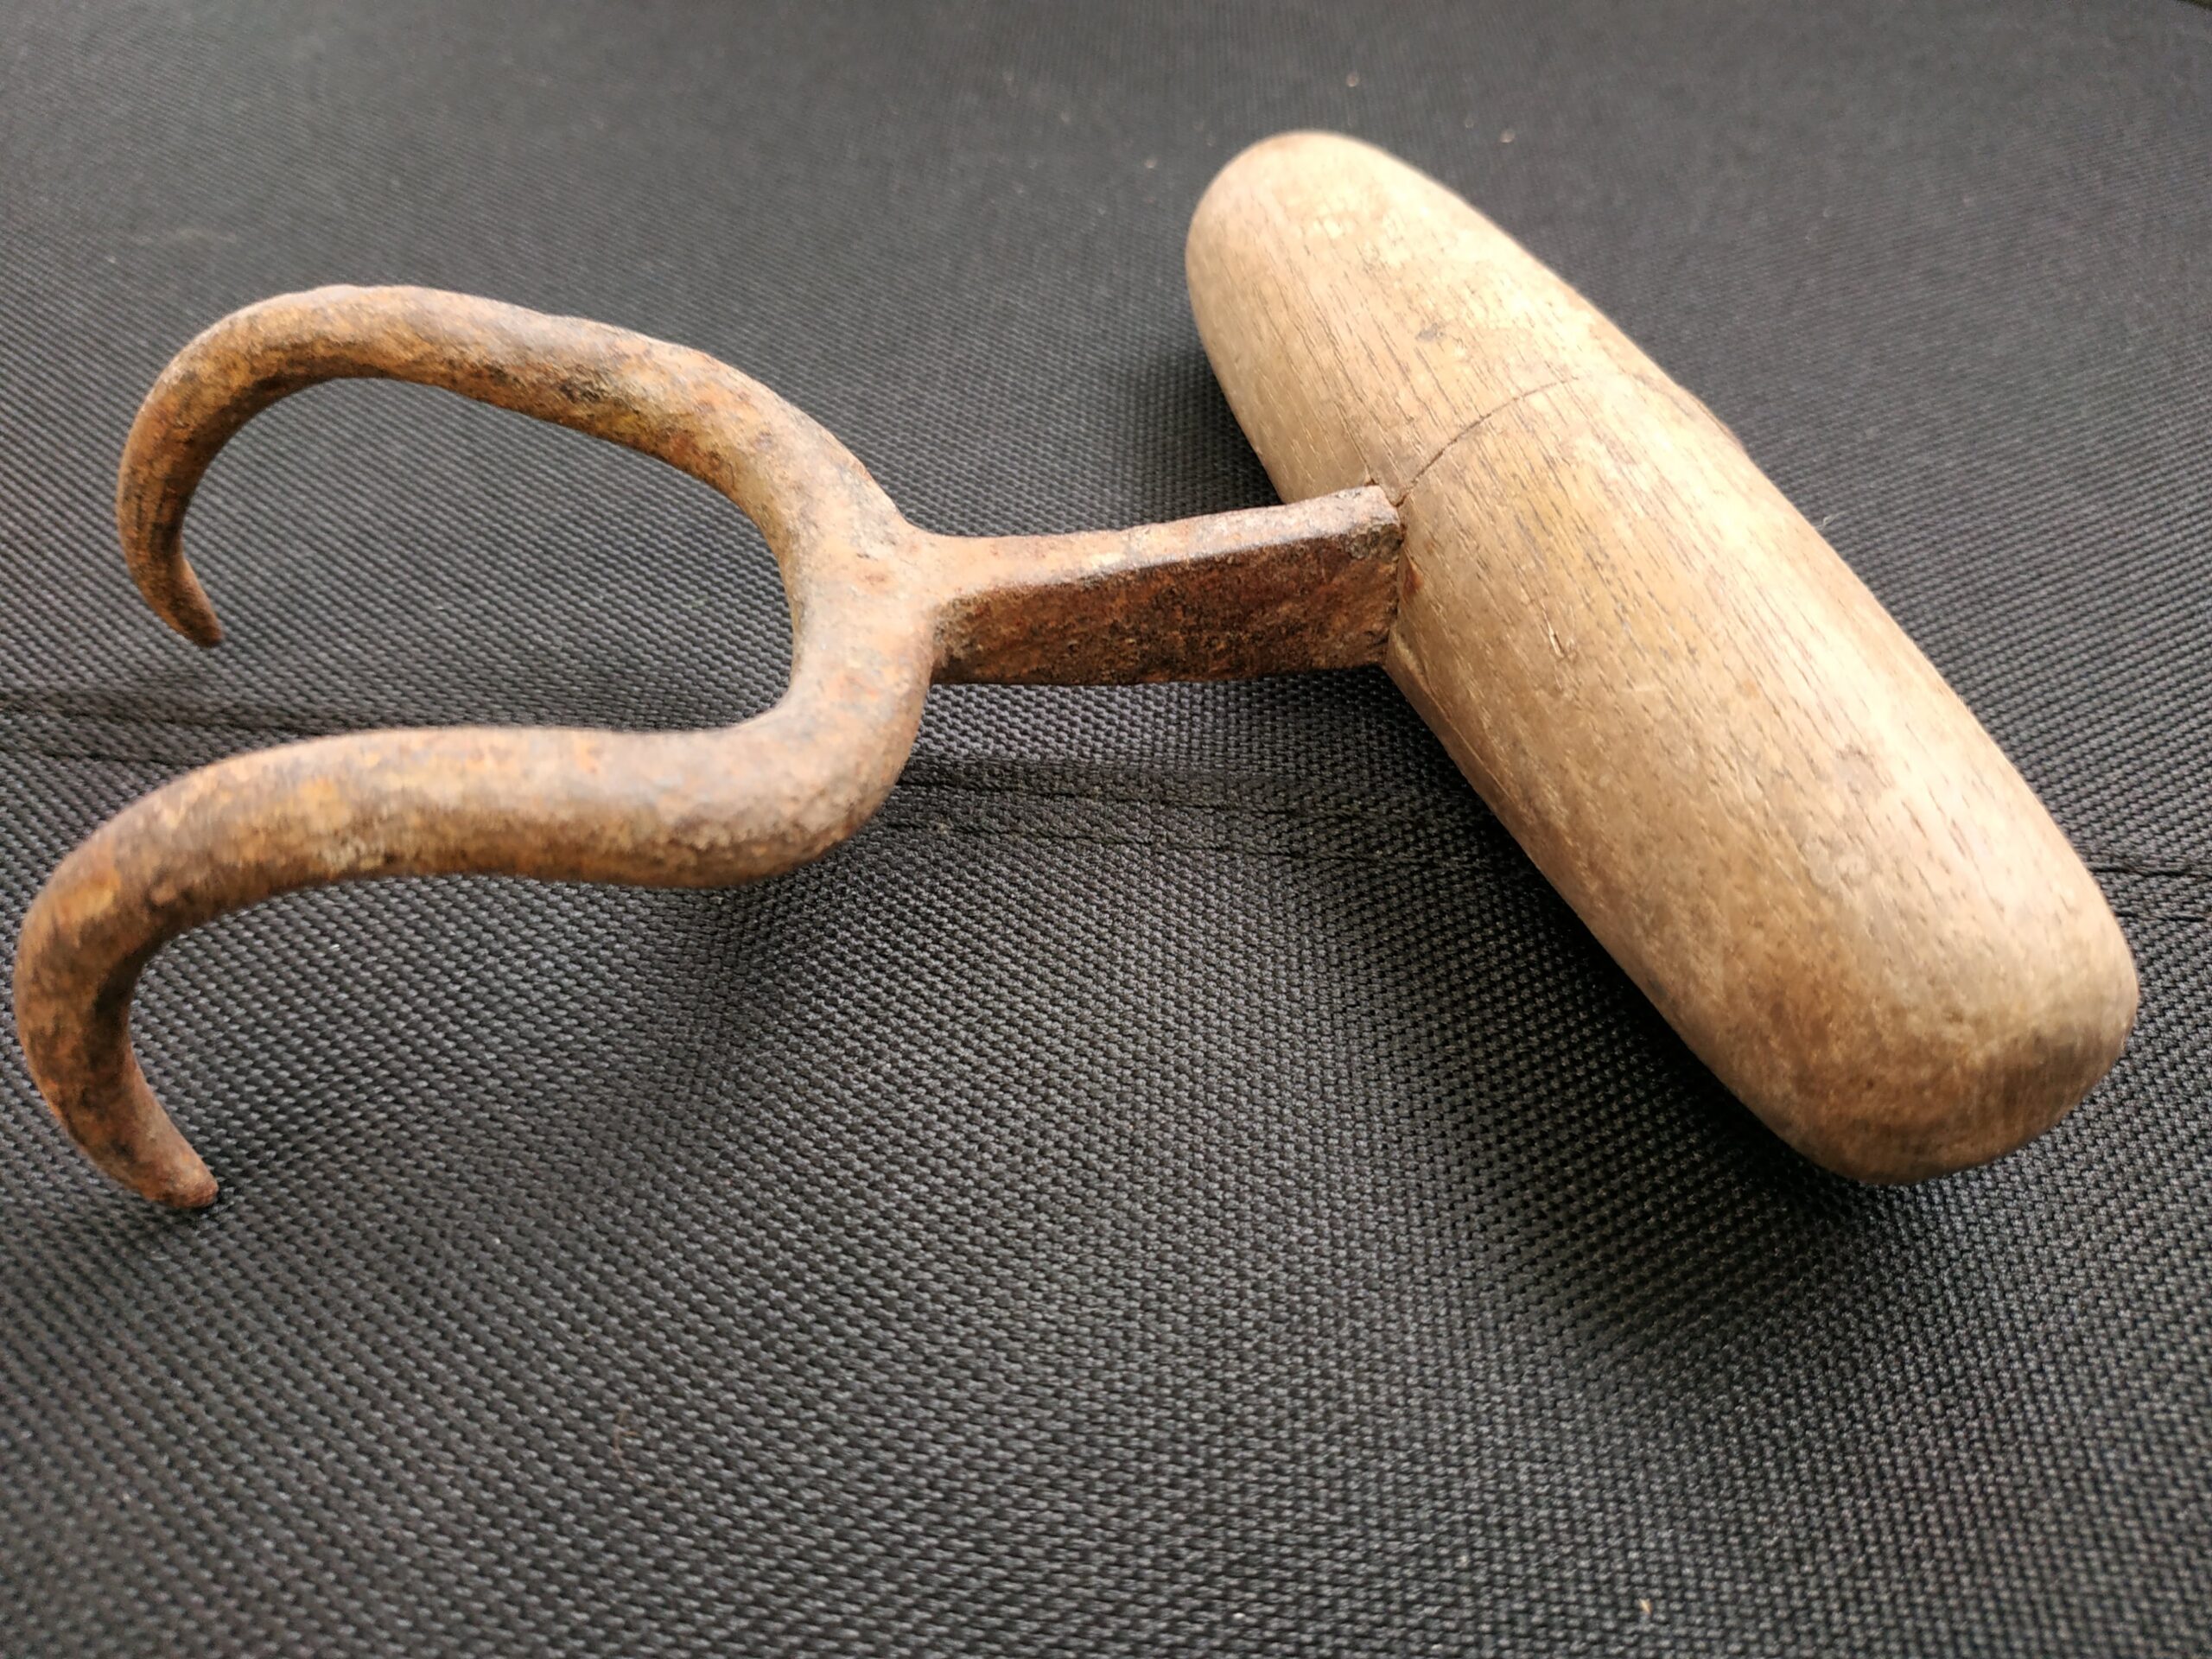 Wool Bale Hook likelu from the 60s or 70s